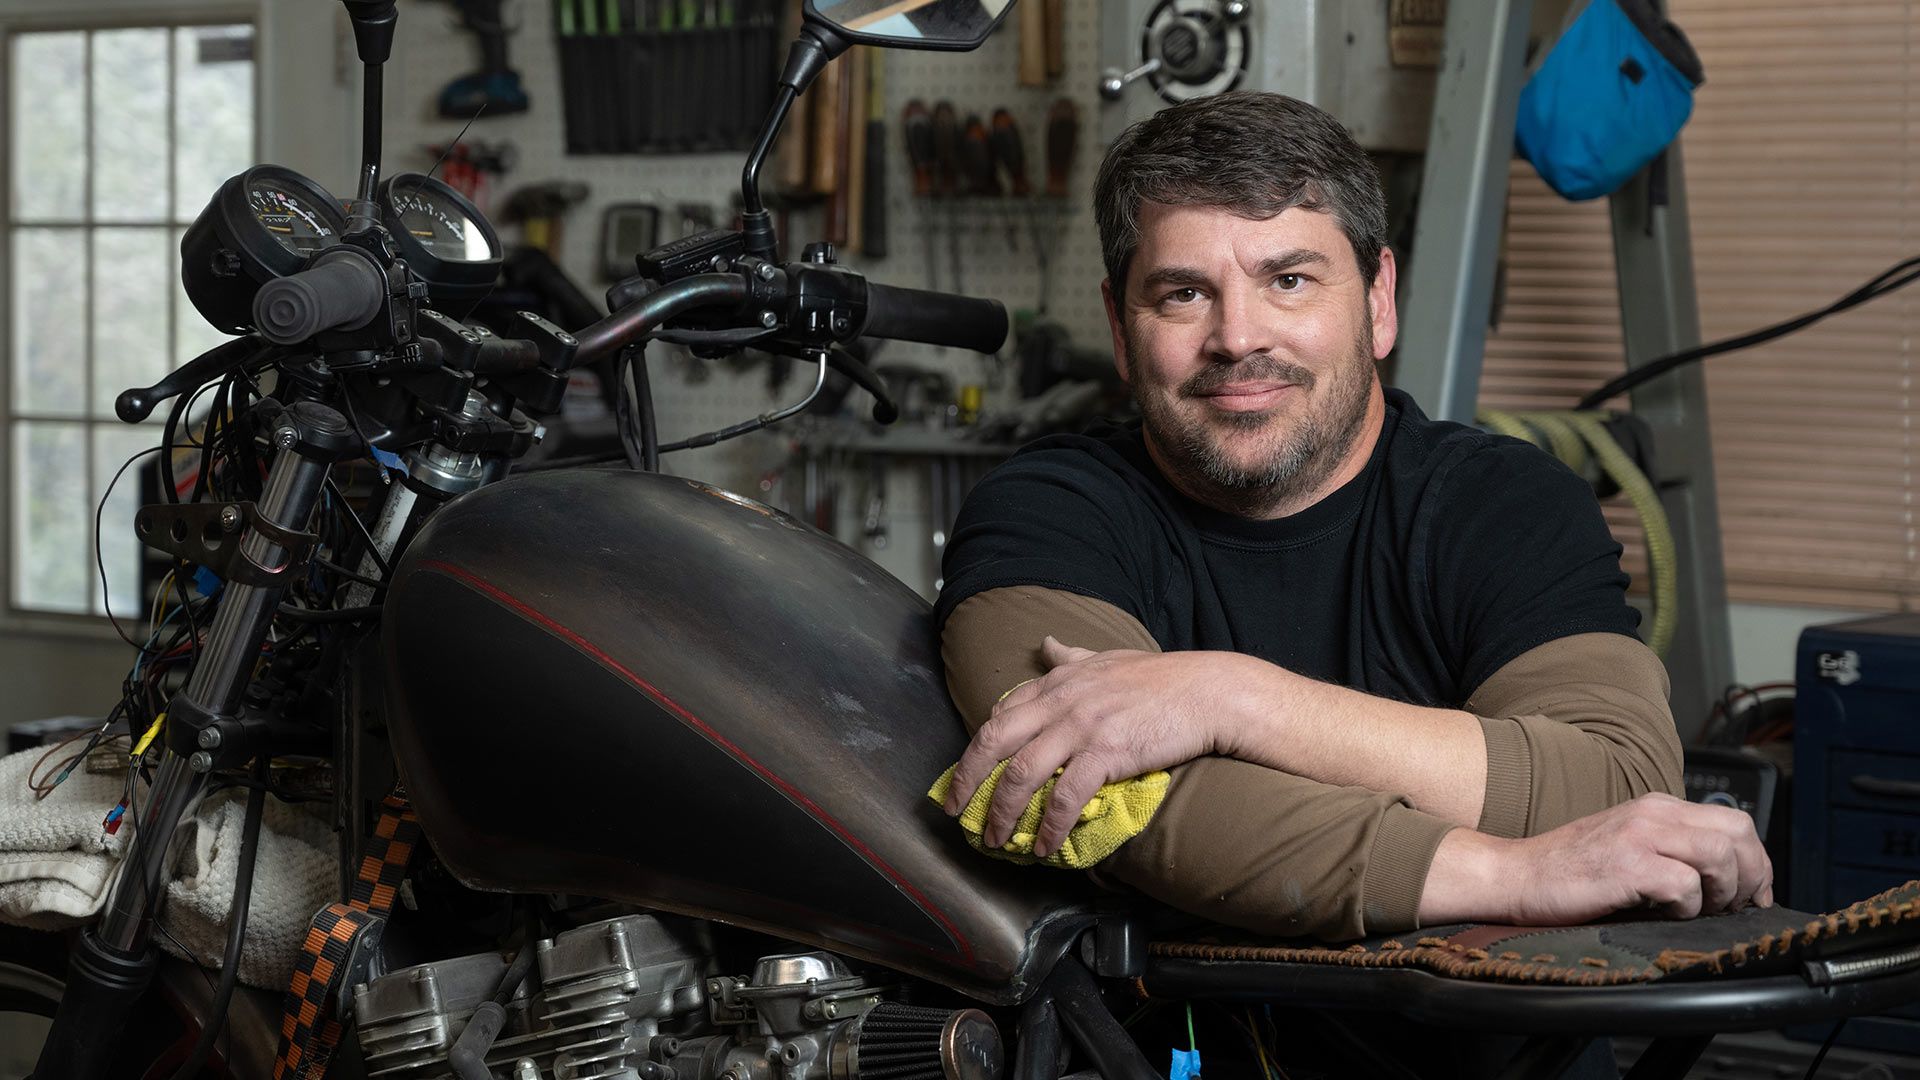 Portrait of James Hatfield from Motorcycle Therapy